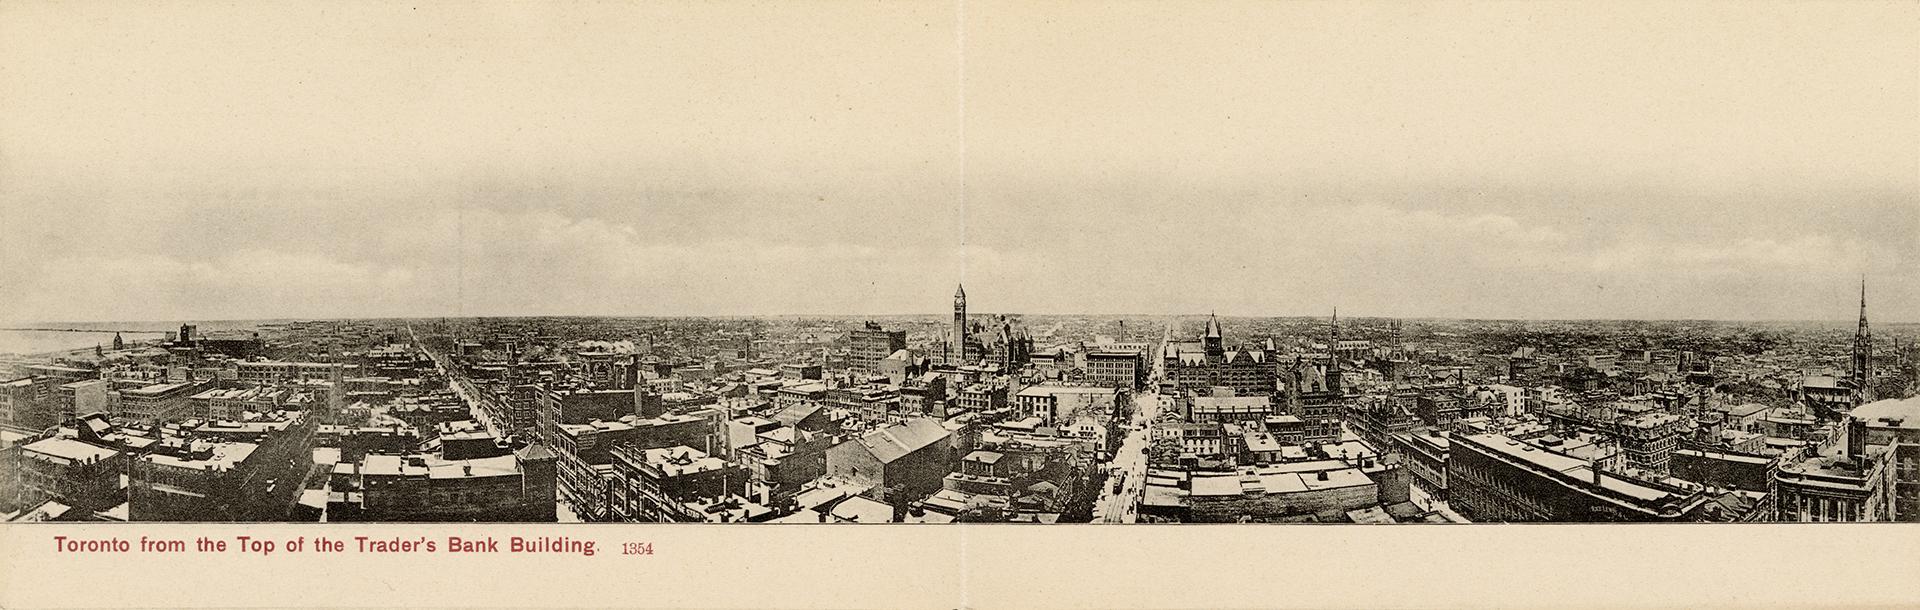 Black and white photograph of a large city taken from a position many stories up a skyscraper.